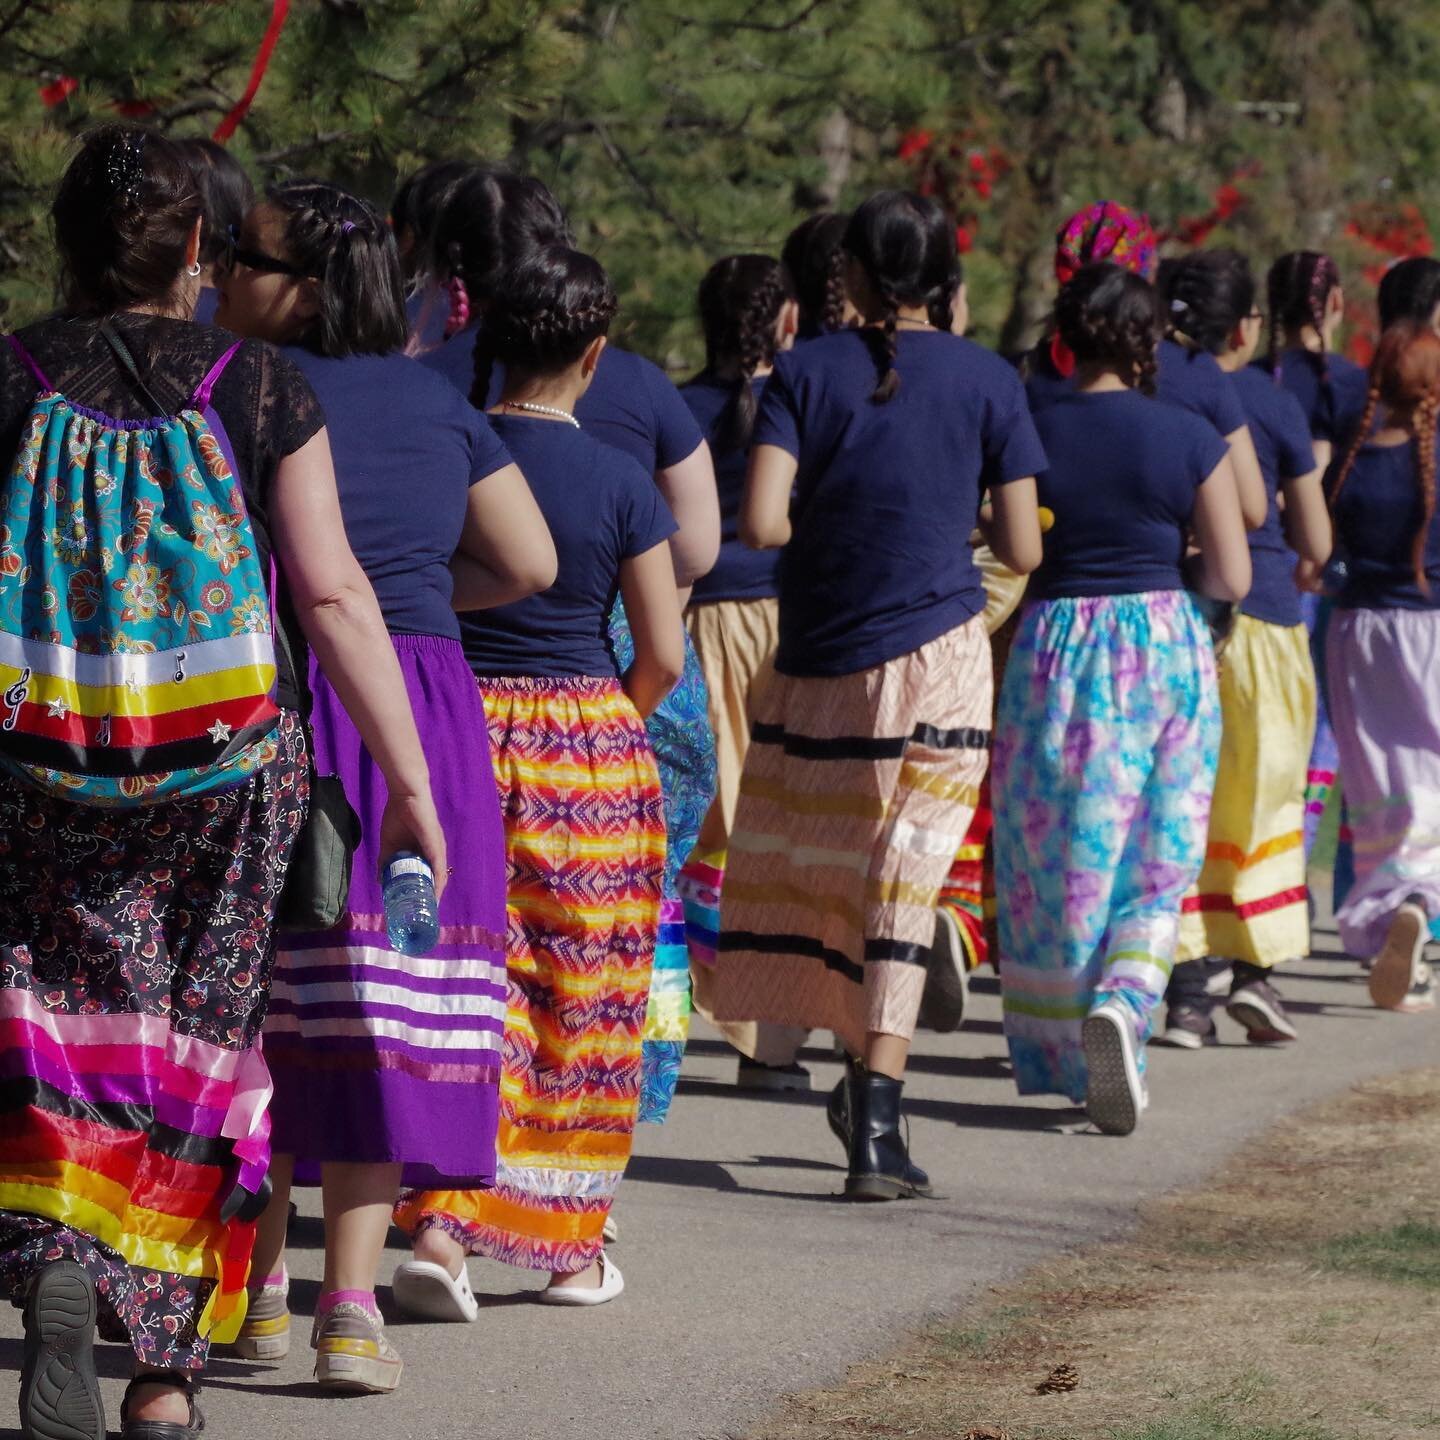 On May 5th we gathered at the Mohkinstis MMEIP Red Ribbon &amp; Dress/Shirt Day event at the &ldquo;field of red ribbons&rdquo; to uplift the stories and voices of those impacted by missing, murdered and exploited Indigenous peoples. We were gifted a